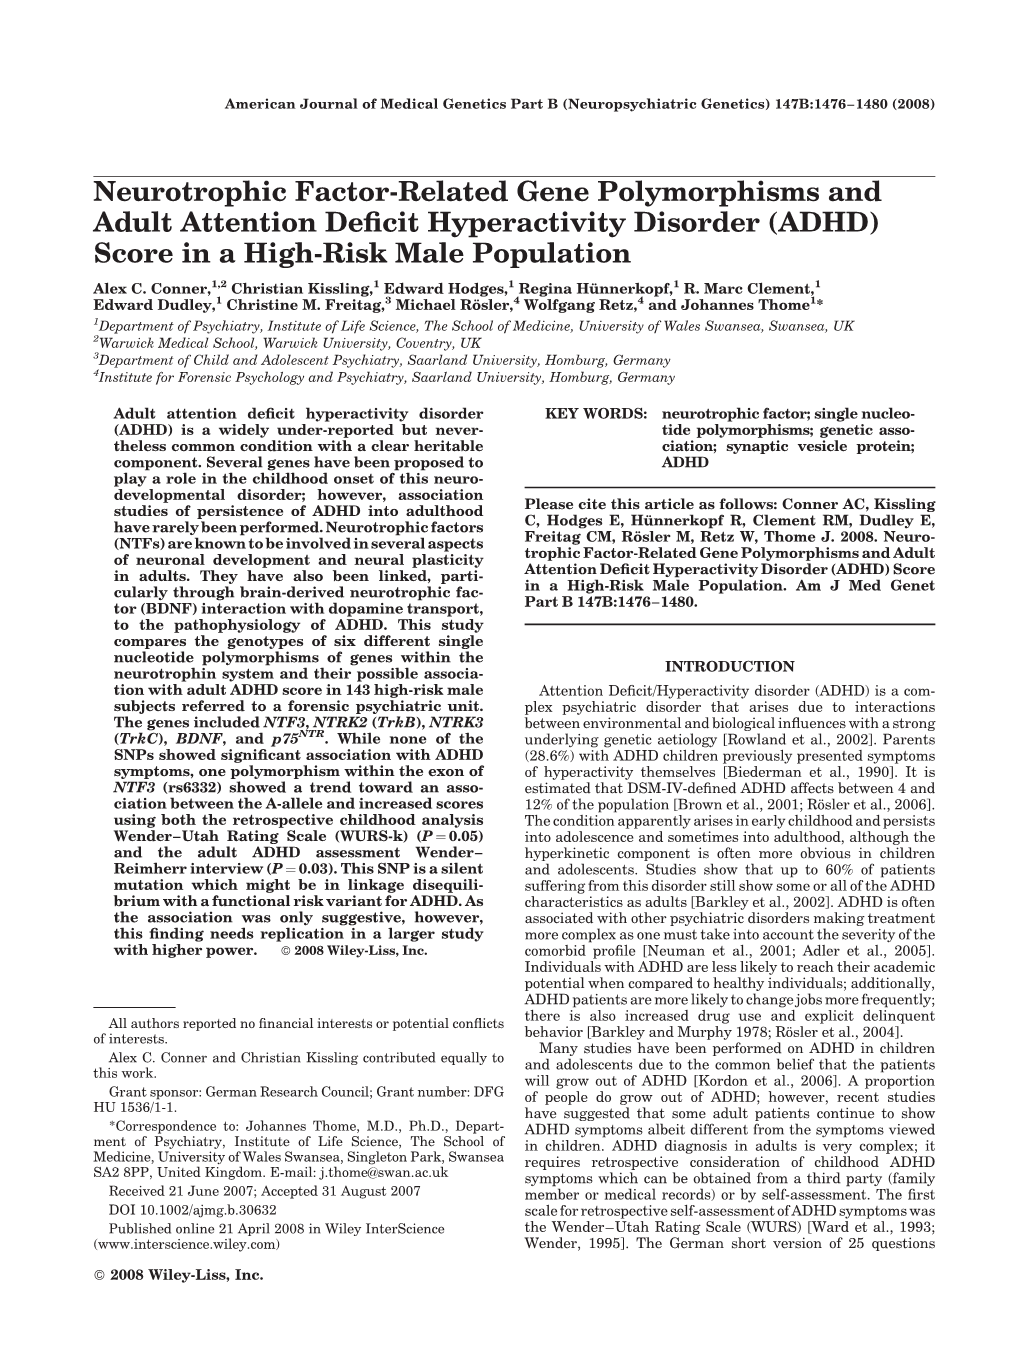 Neurotrophic Factor-Related Gene Polymorphisms and Adult Attention Deﬁcit Hyperactivity Disorder (ADHD) Score in a High-Risk Male Population Alex C